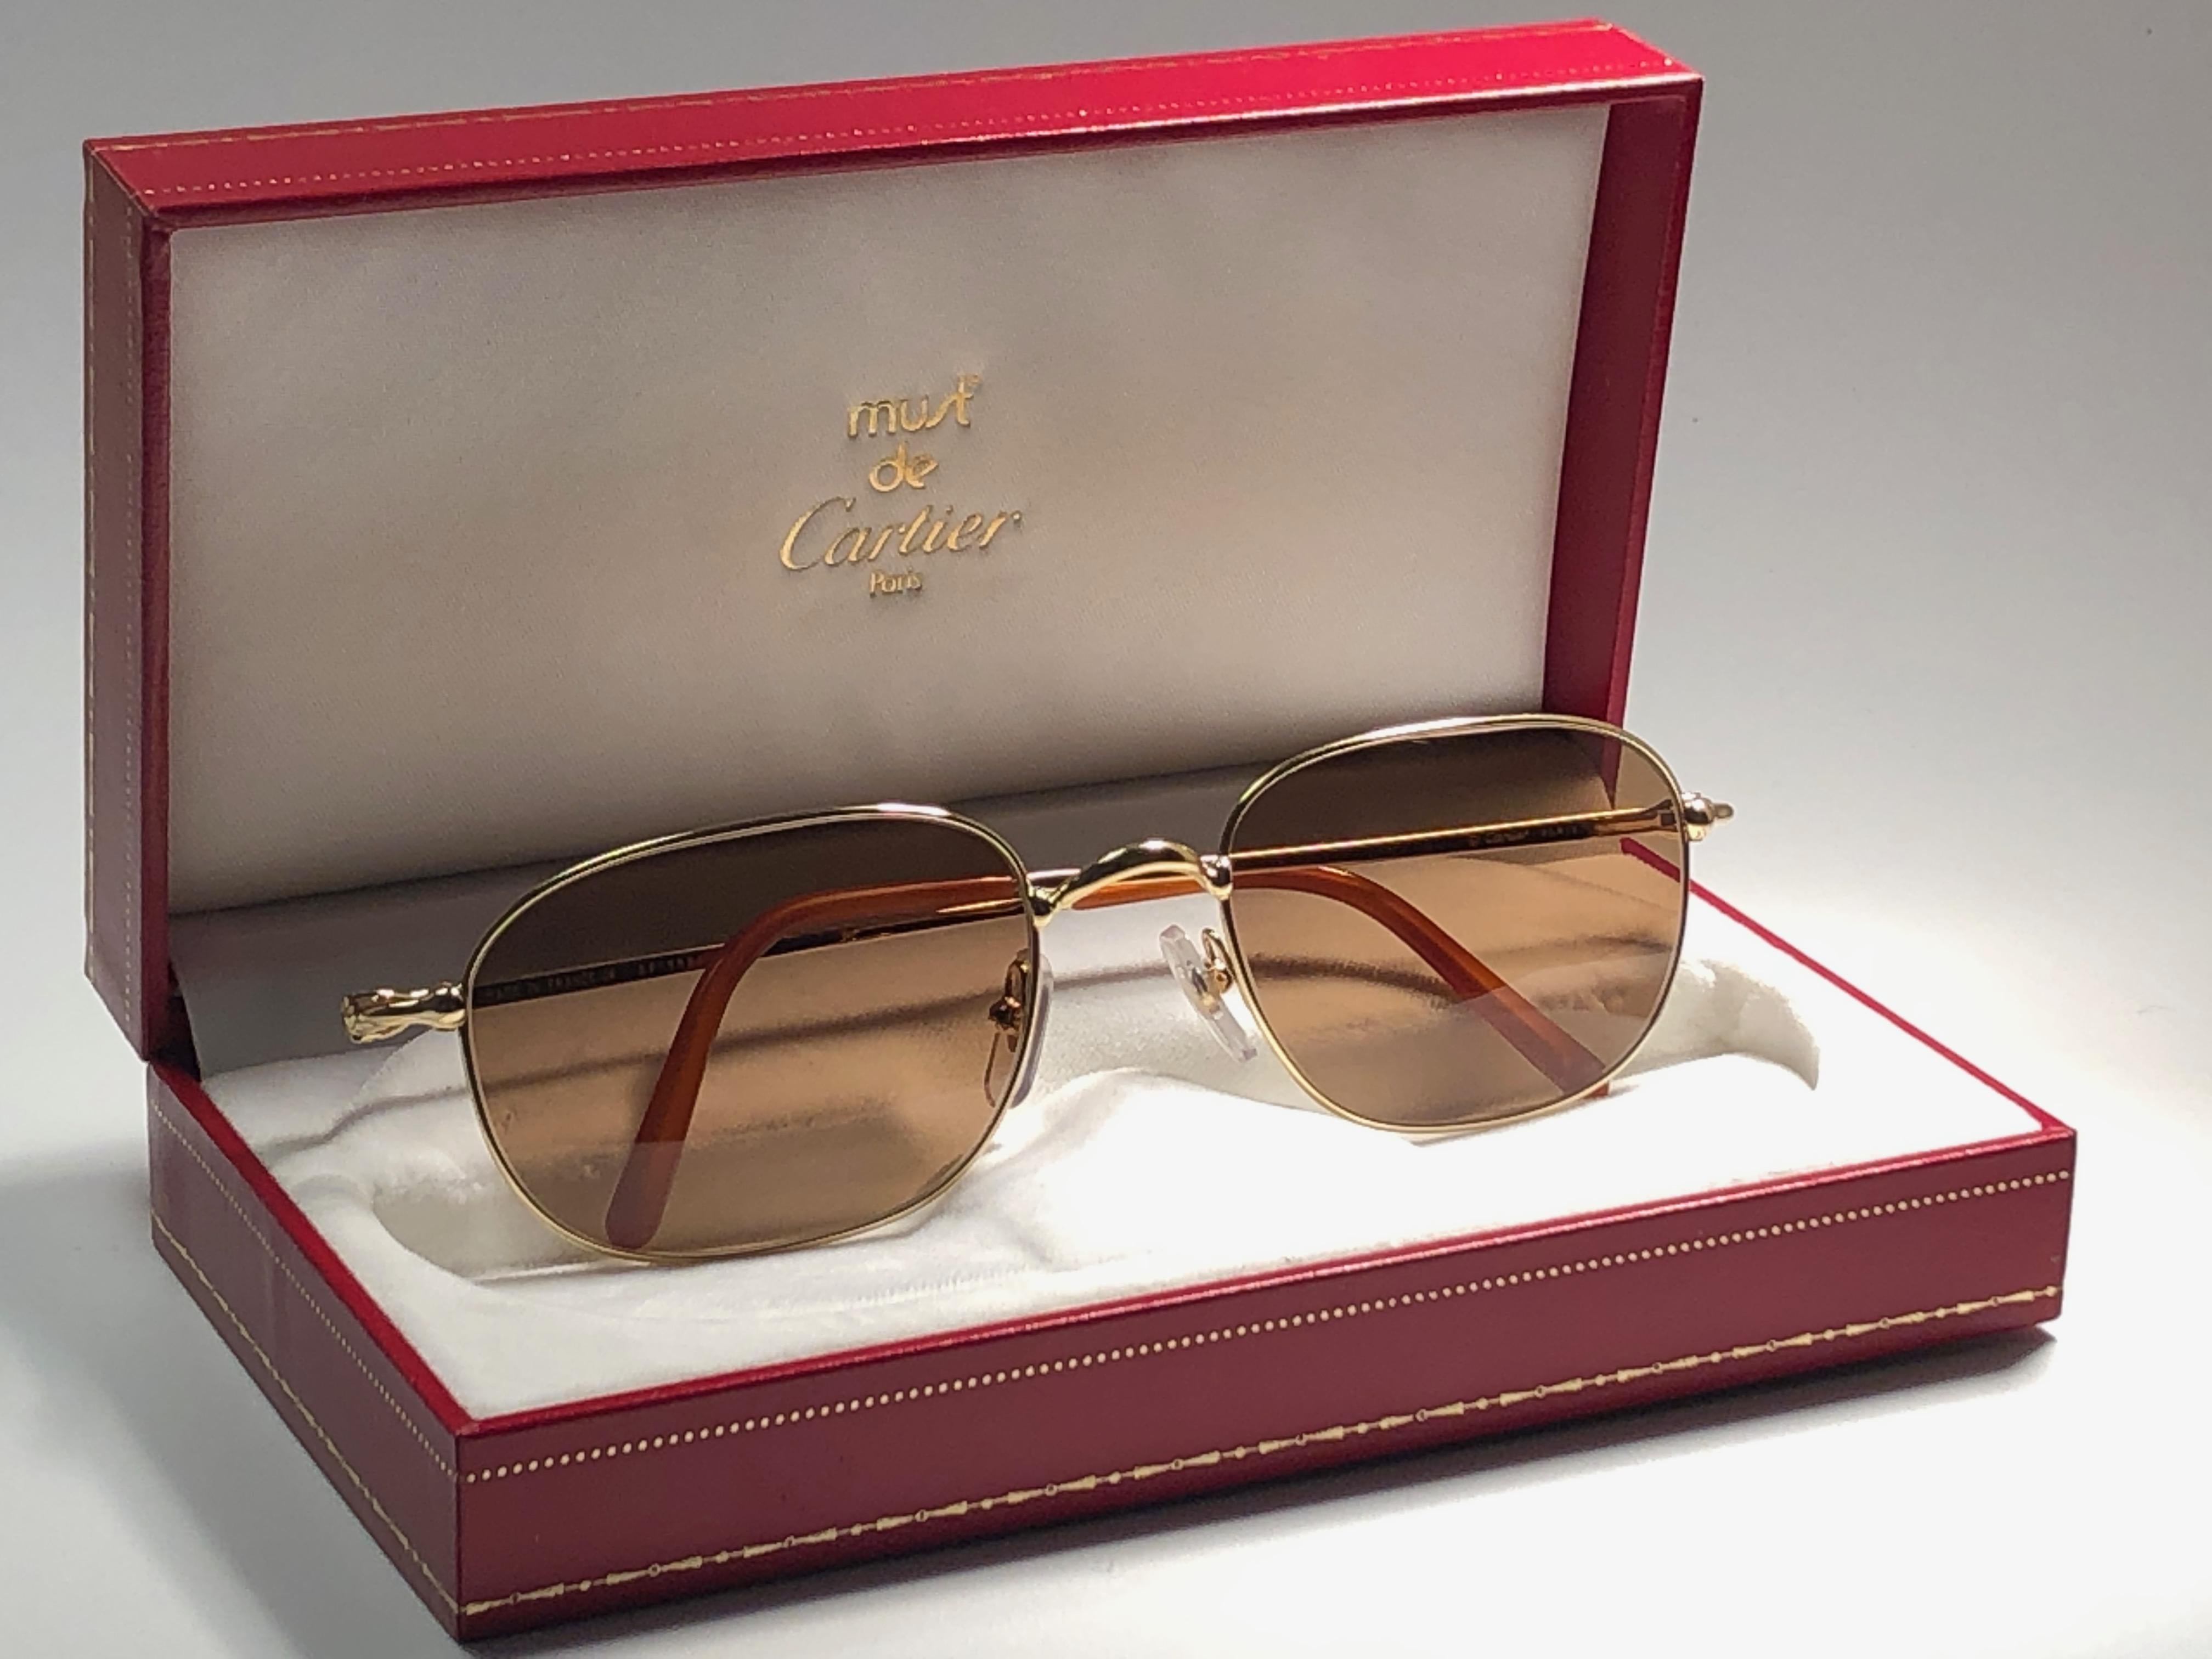 New 1990 Cartier Vesta Sunglasses with brown (uv protection) lenses. All hallmarks. Cartier gold signs on the ear paddles. These are like a pair of jewels on your nose. 
Please notice that this sunglasses are nearly 30 years old and could show minor